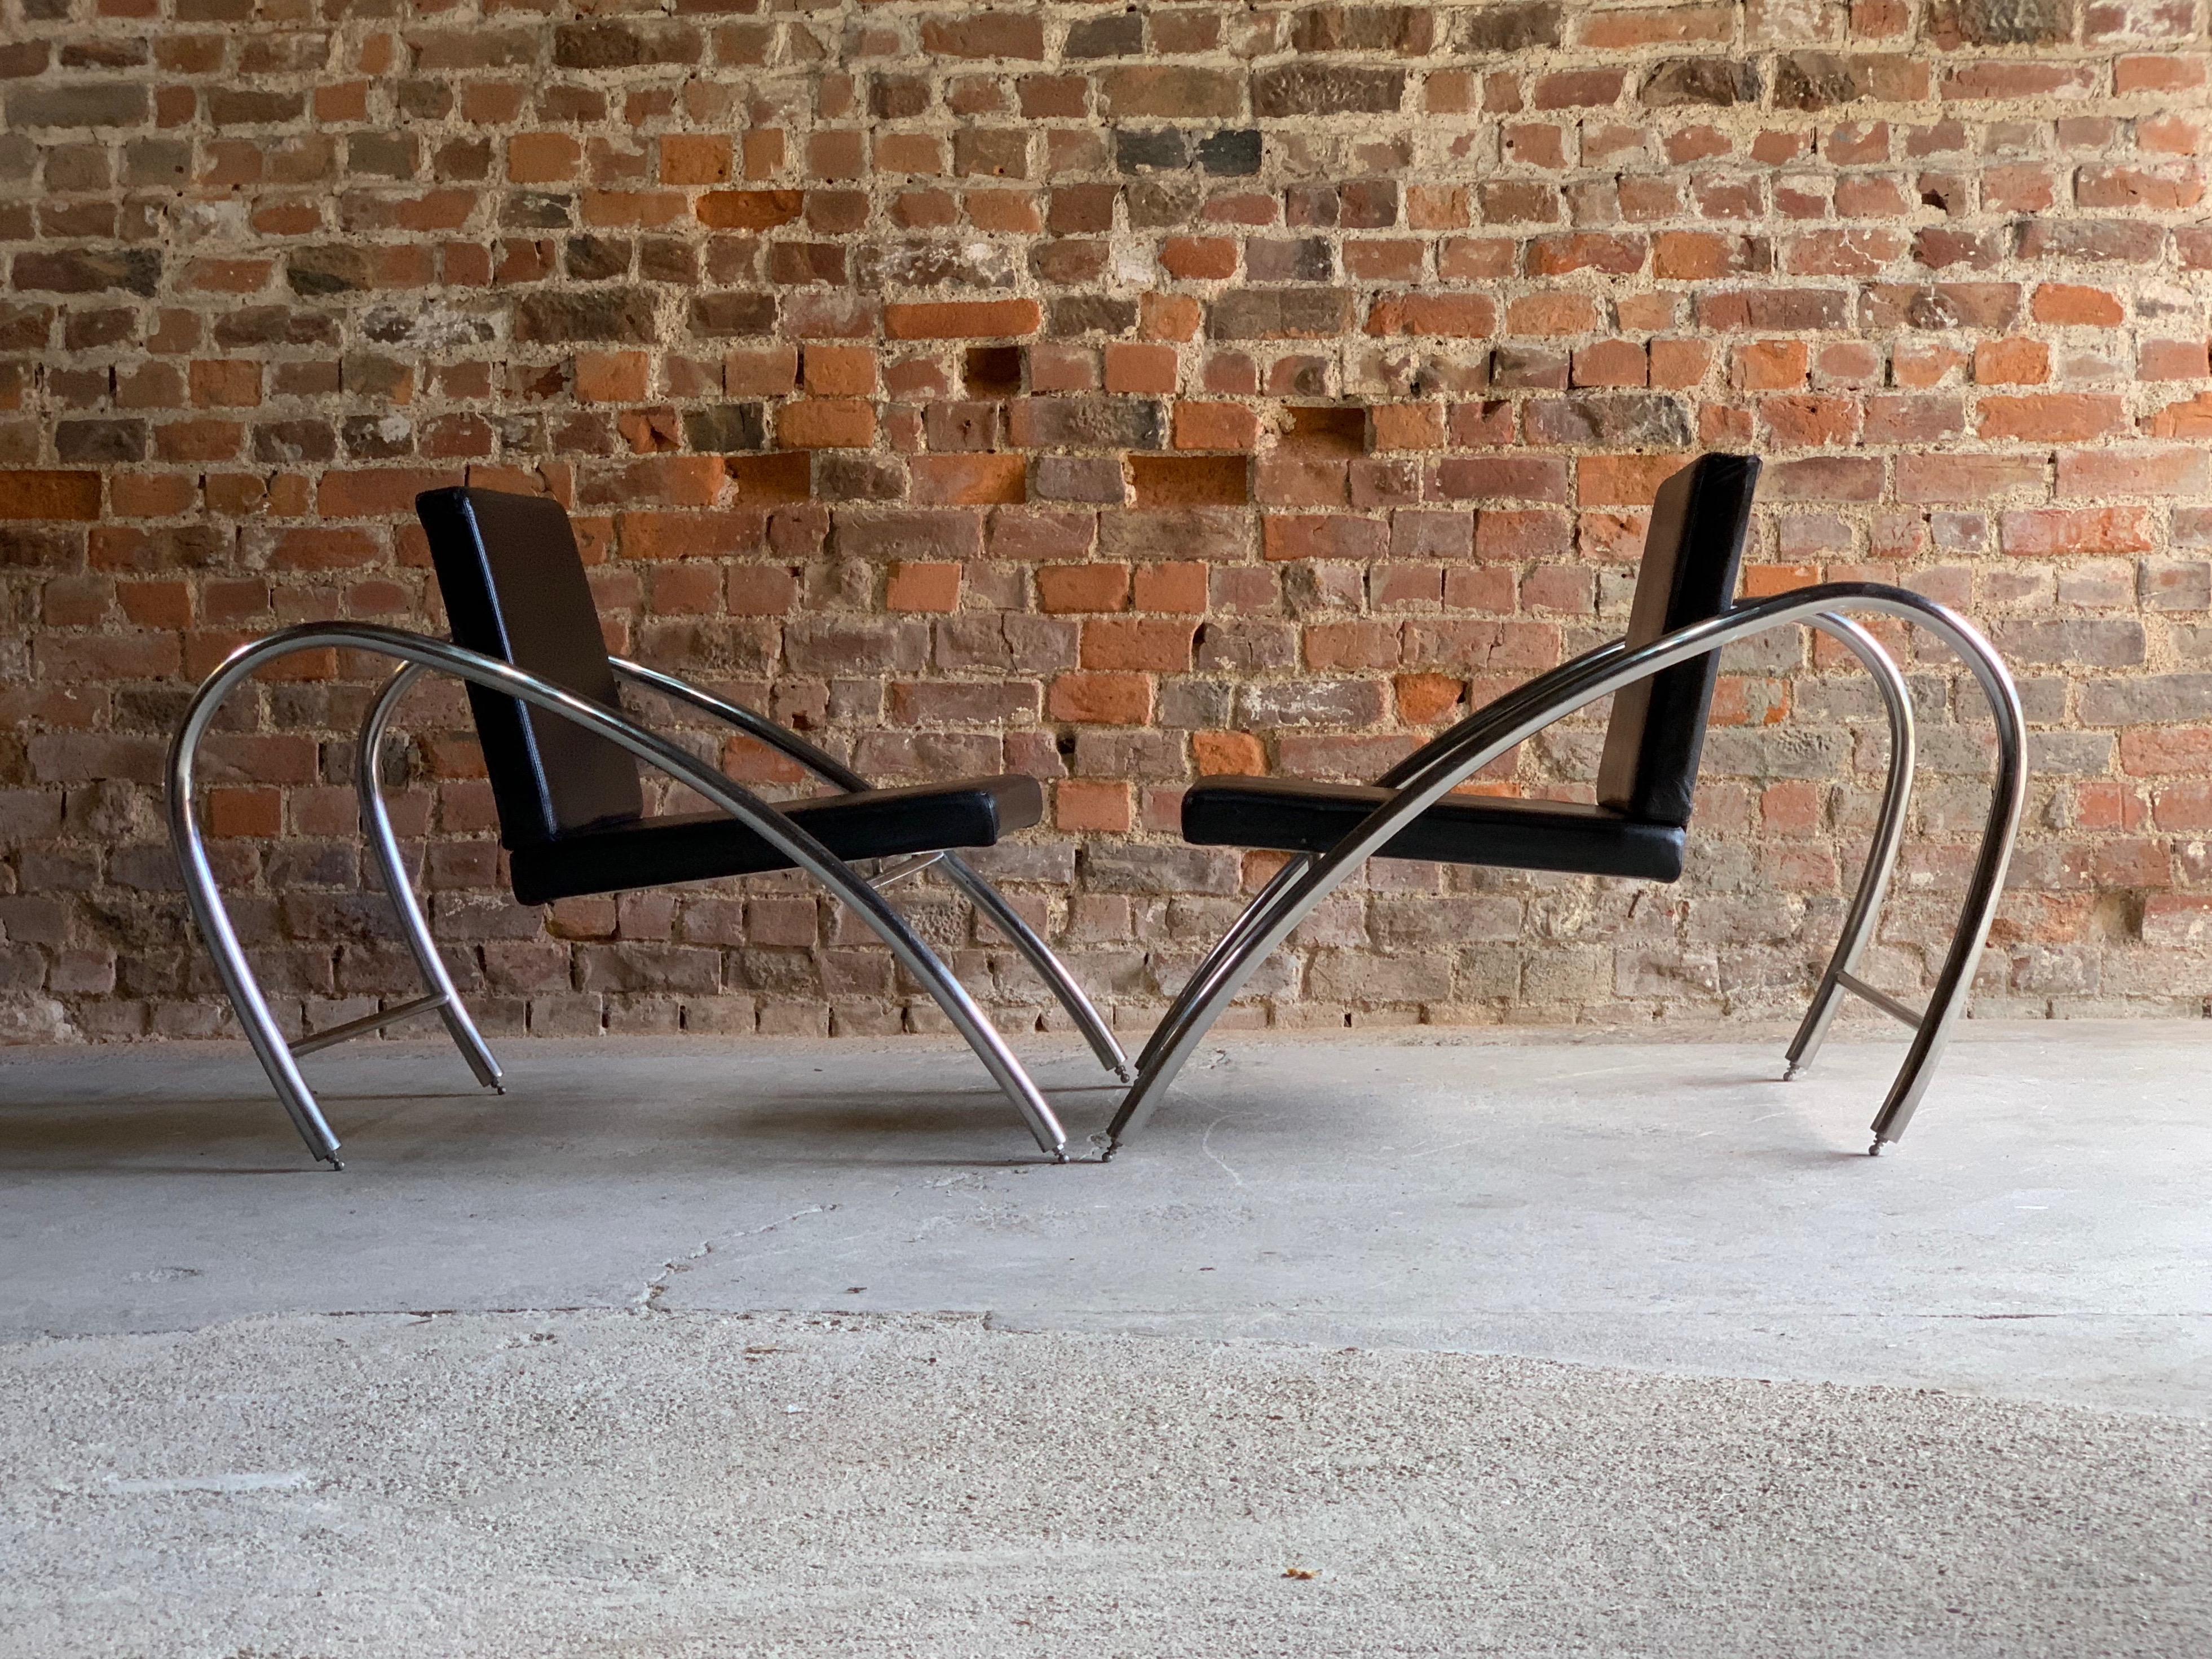 Moreno Chrome & Leather Lounge Chairs by Francois Scali & Alain Domingo for Nemo 1